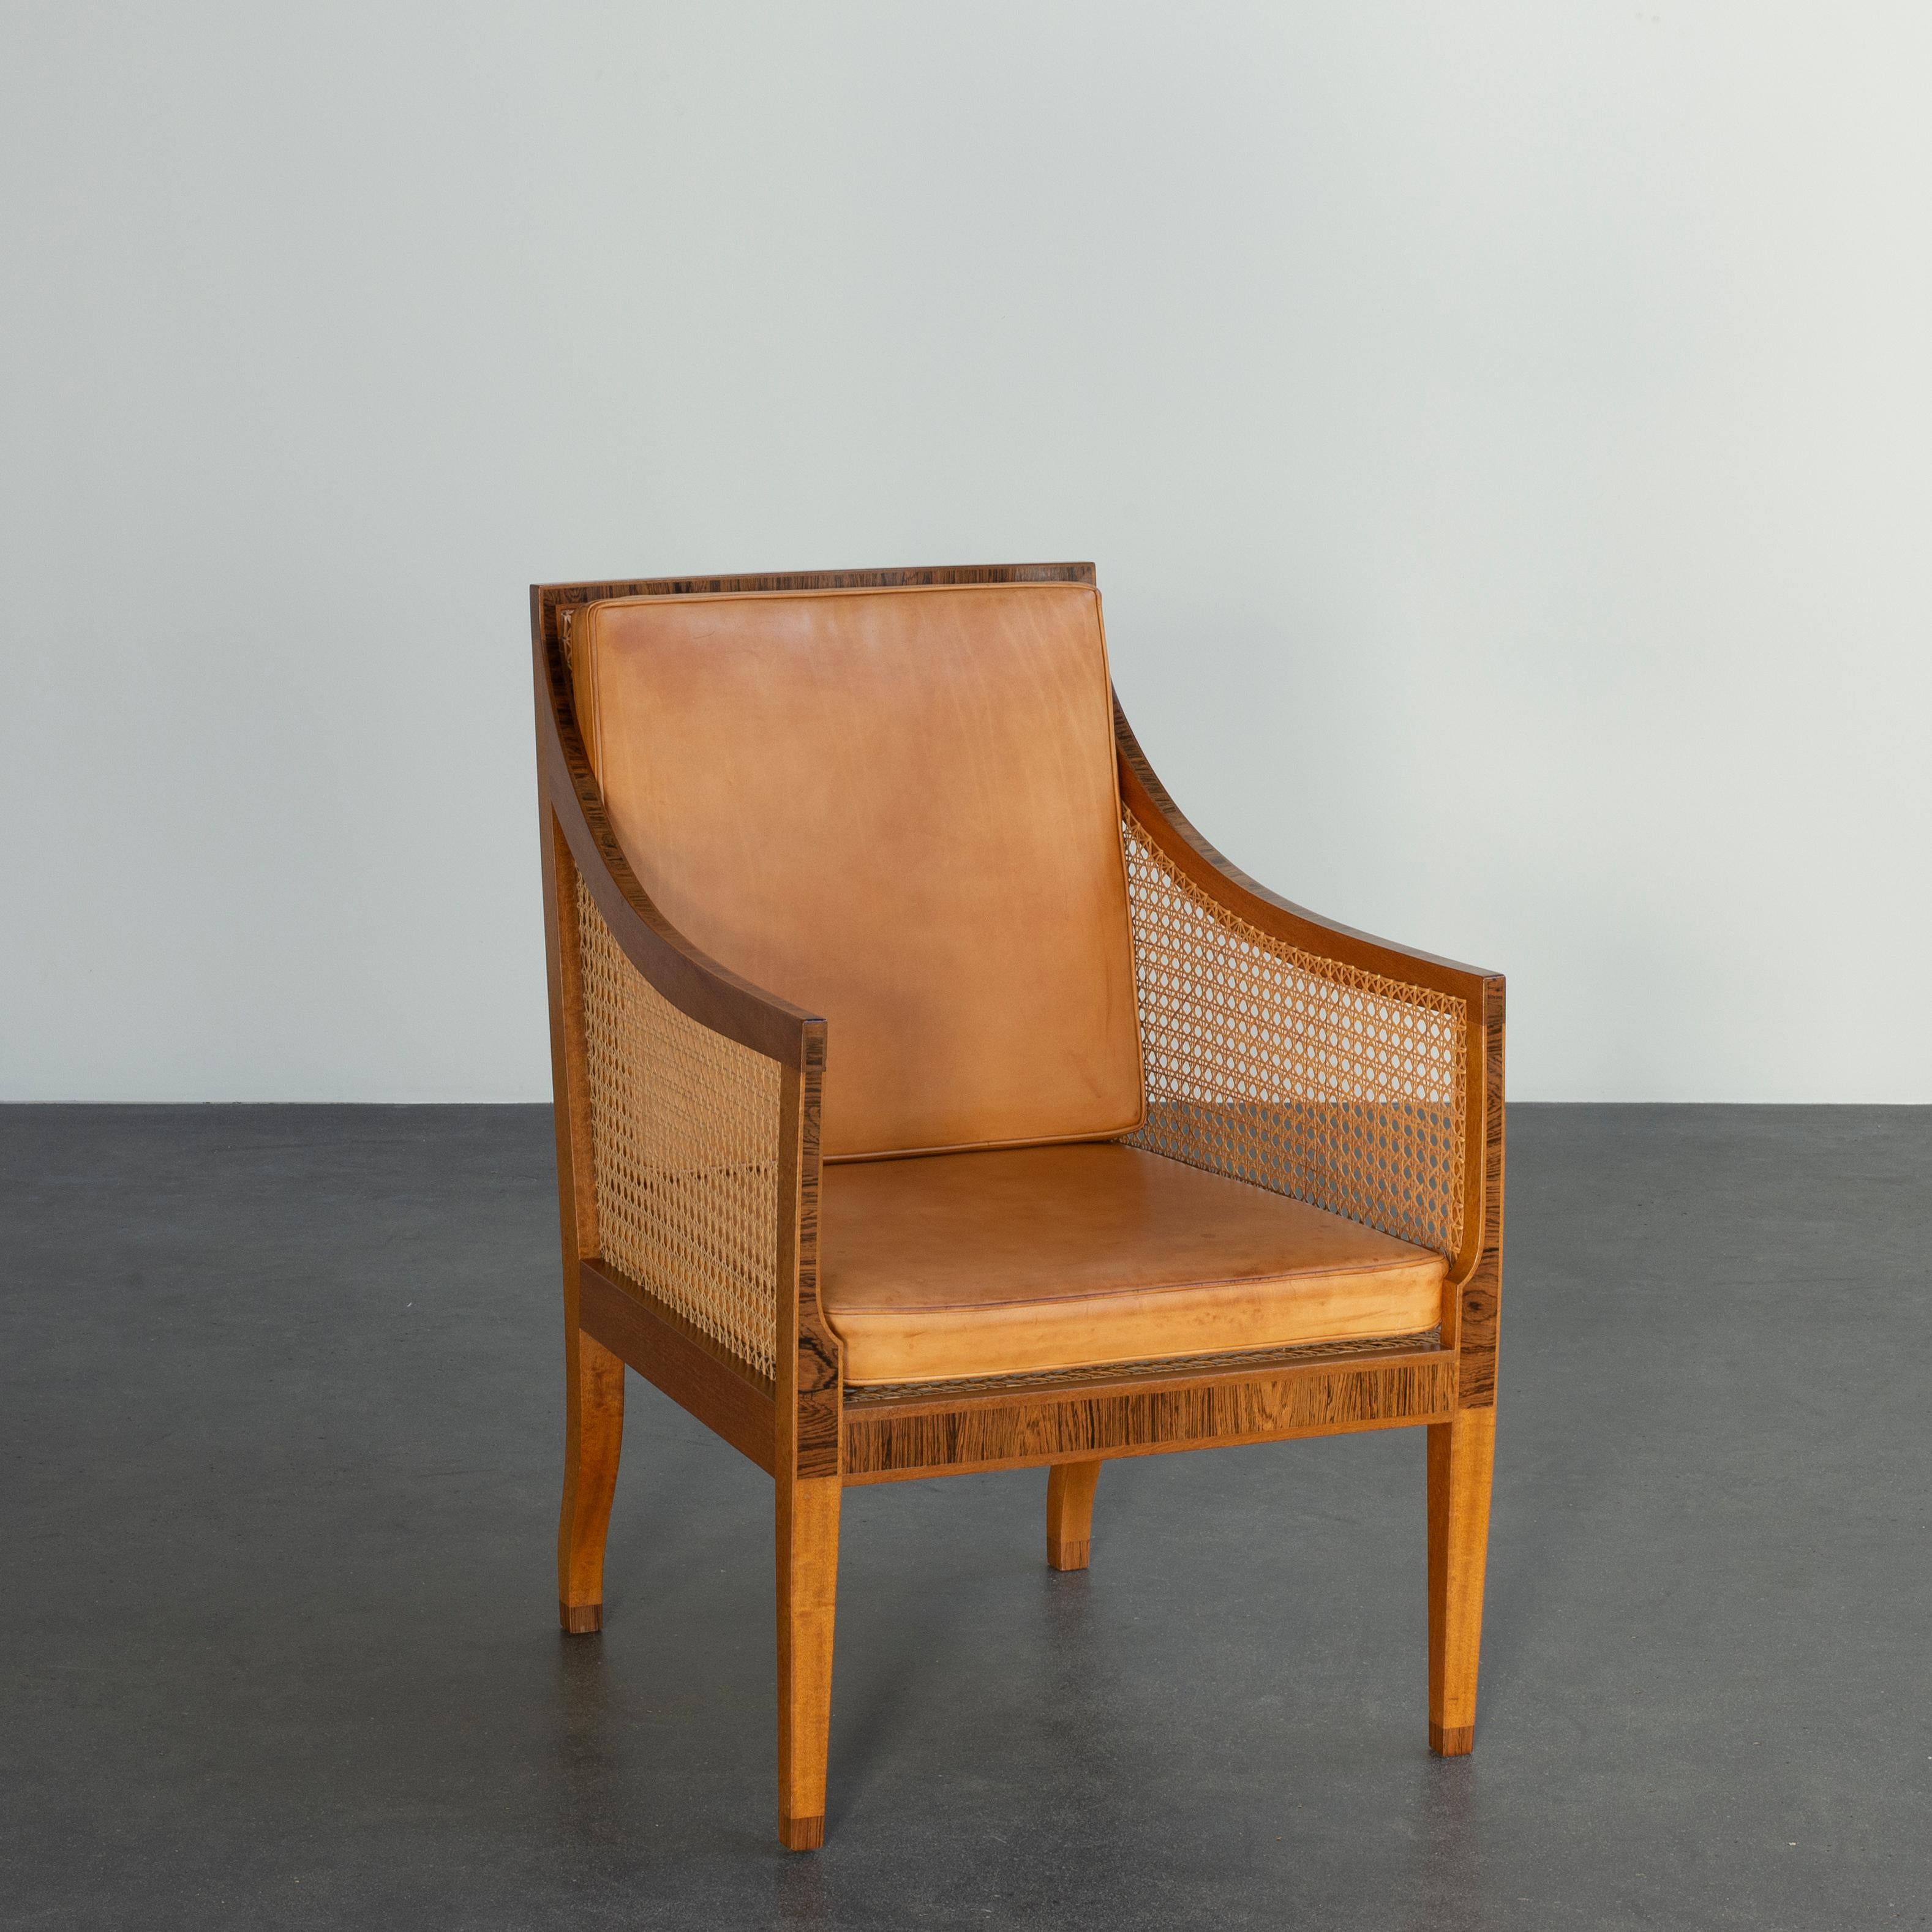 Kaare Klint bergere of mahogany. Sides, seat and back with woven cane. Loose cushions in seat and back upholstered with patinated leather. Executed by Rud. Rasmussen cabinetmakers.